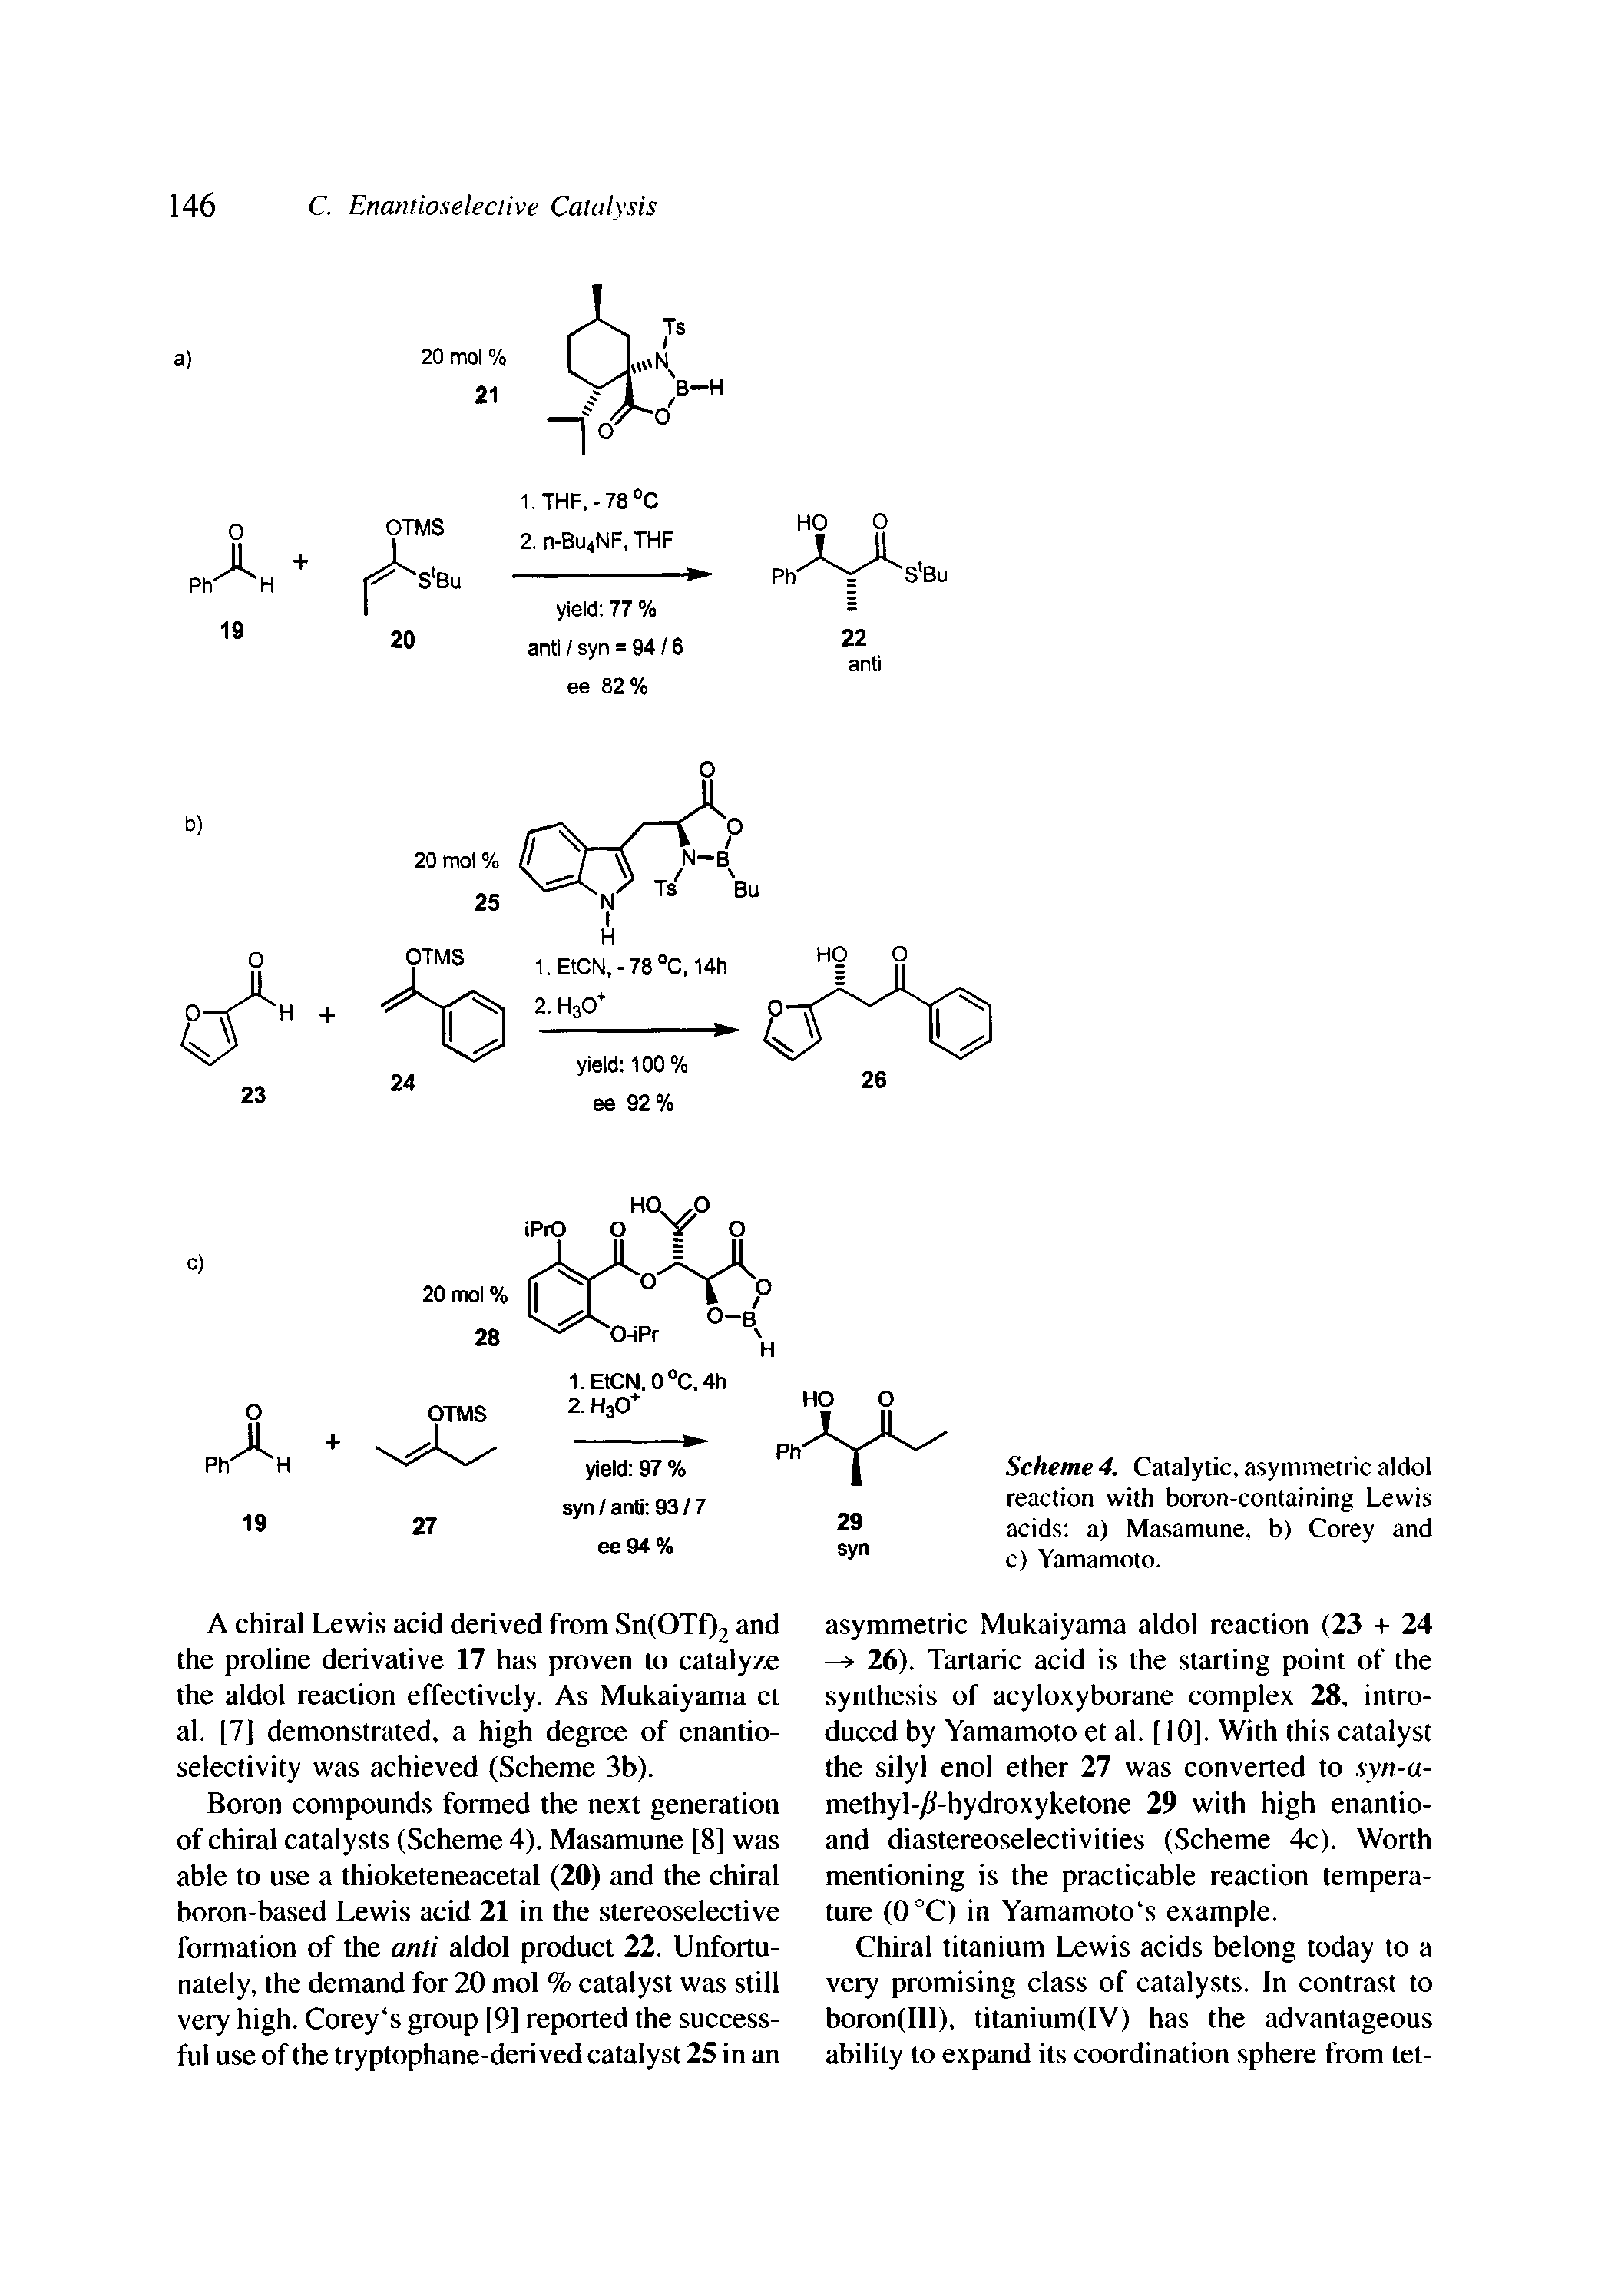 Scheme 4. Catalytic, asymmetric aldol reaction with boron-containing Lewis acids a) Masamune, b) Corey and c) Yamamoto.